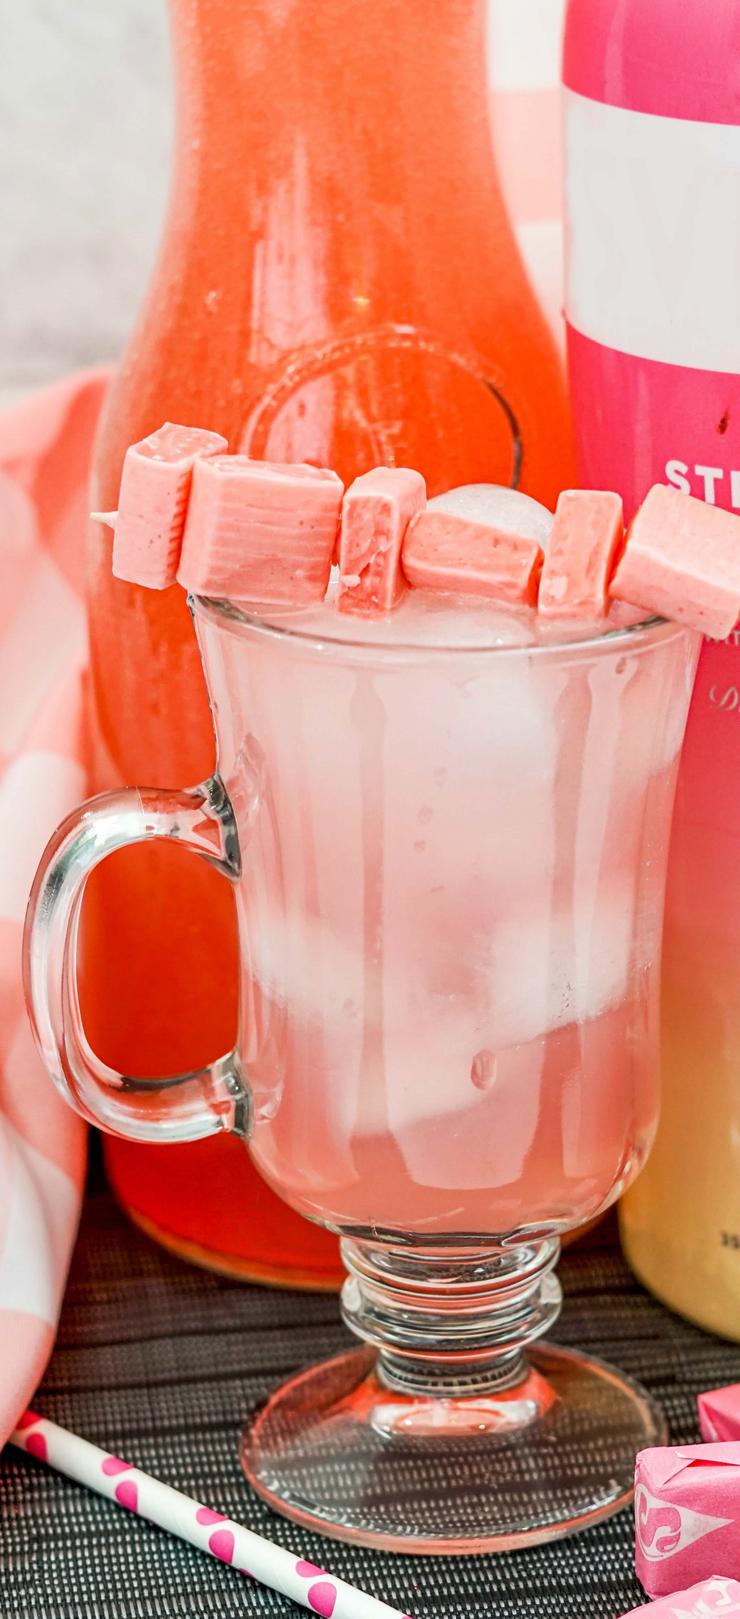 BEST Pink Starburst Cocktail Recipe – Easy and Simple Vodka Alcohol Drinks